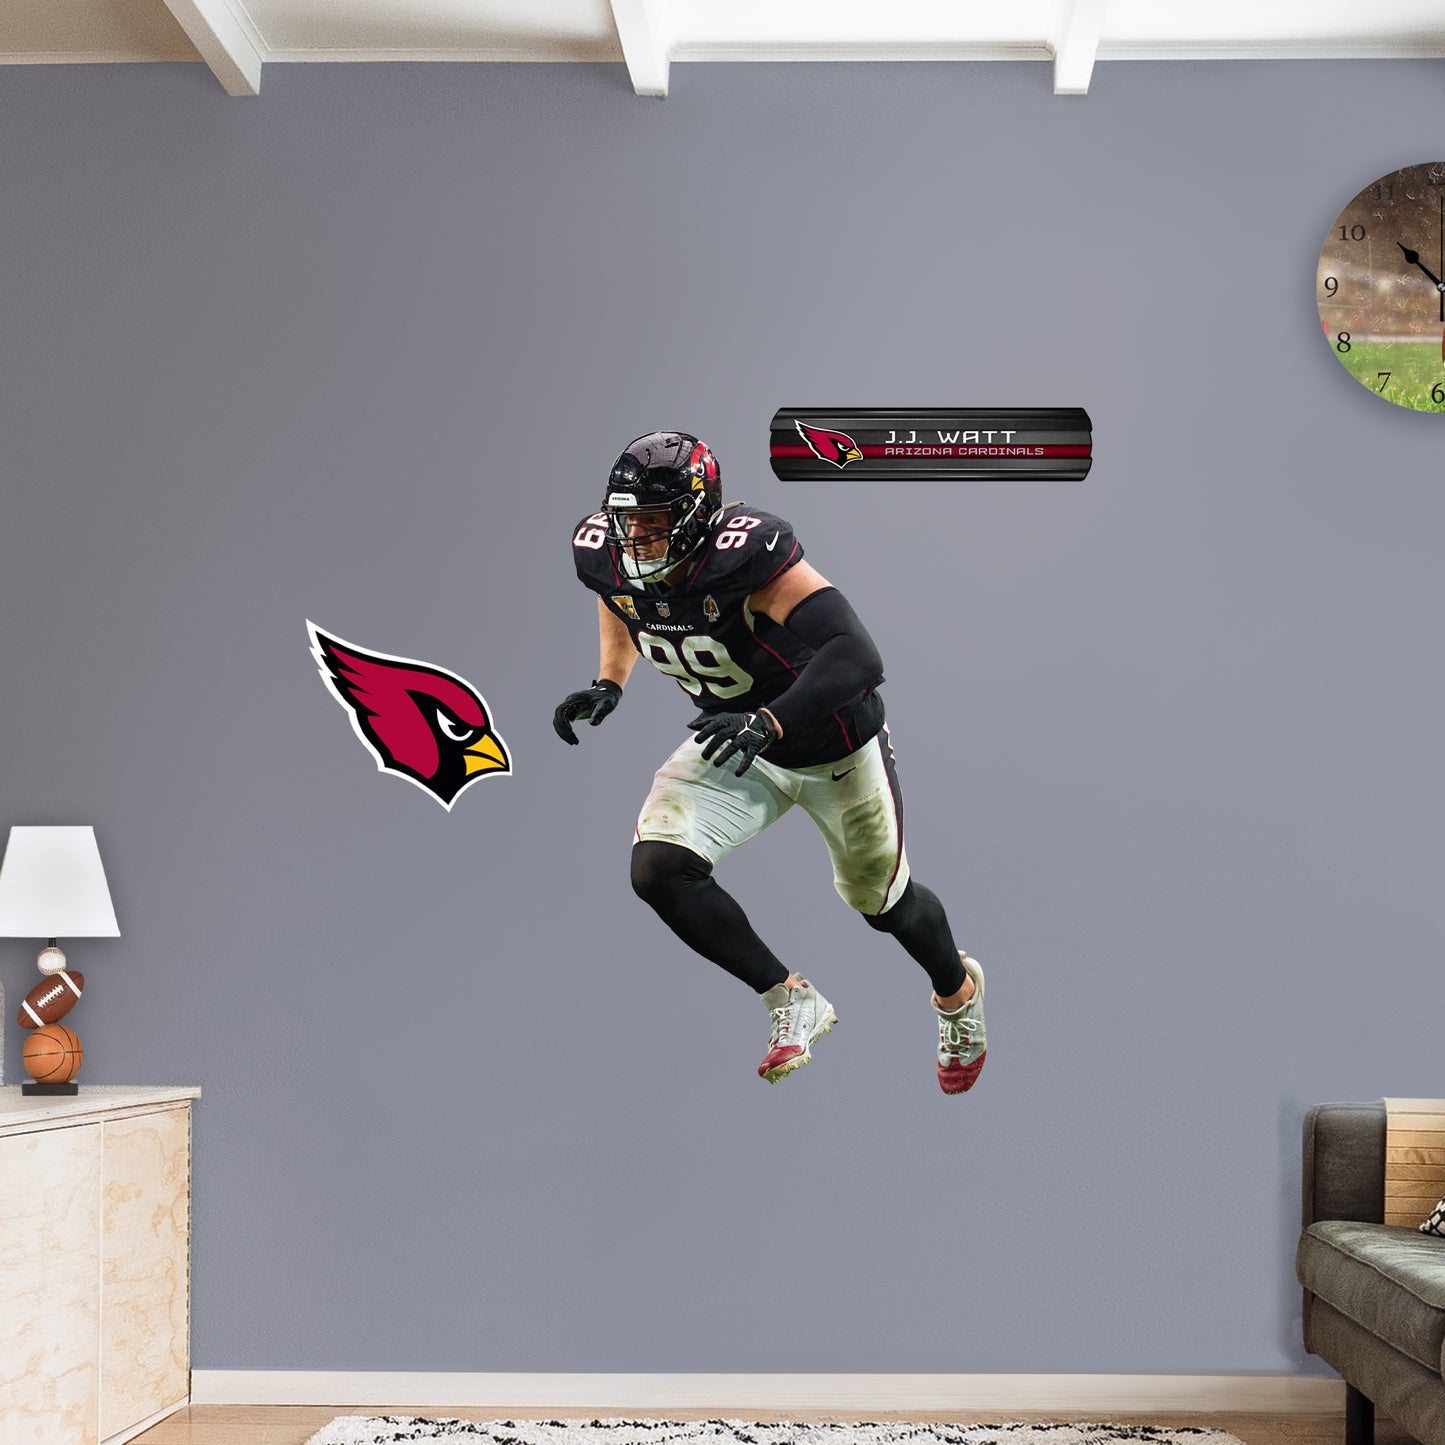 Arizona Cardinals: J.J. Watt  Black Jersey        - Officially Licensed NFL Removable     Adhesive Decal